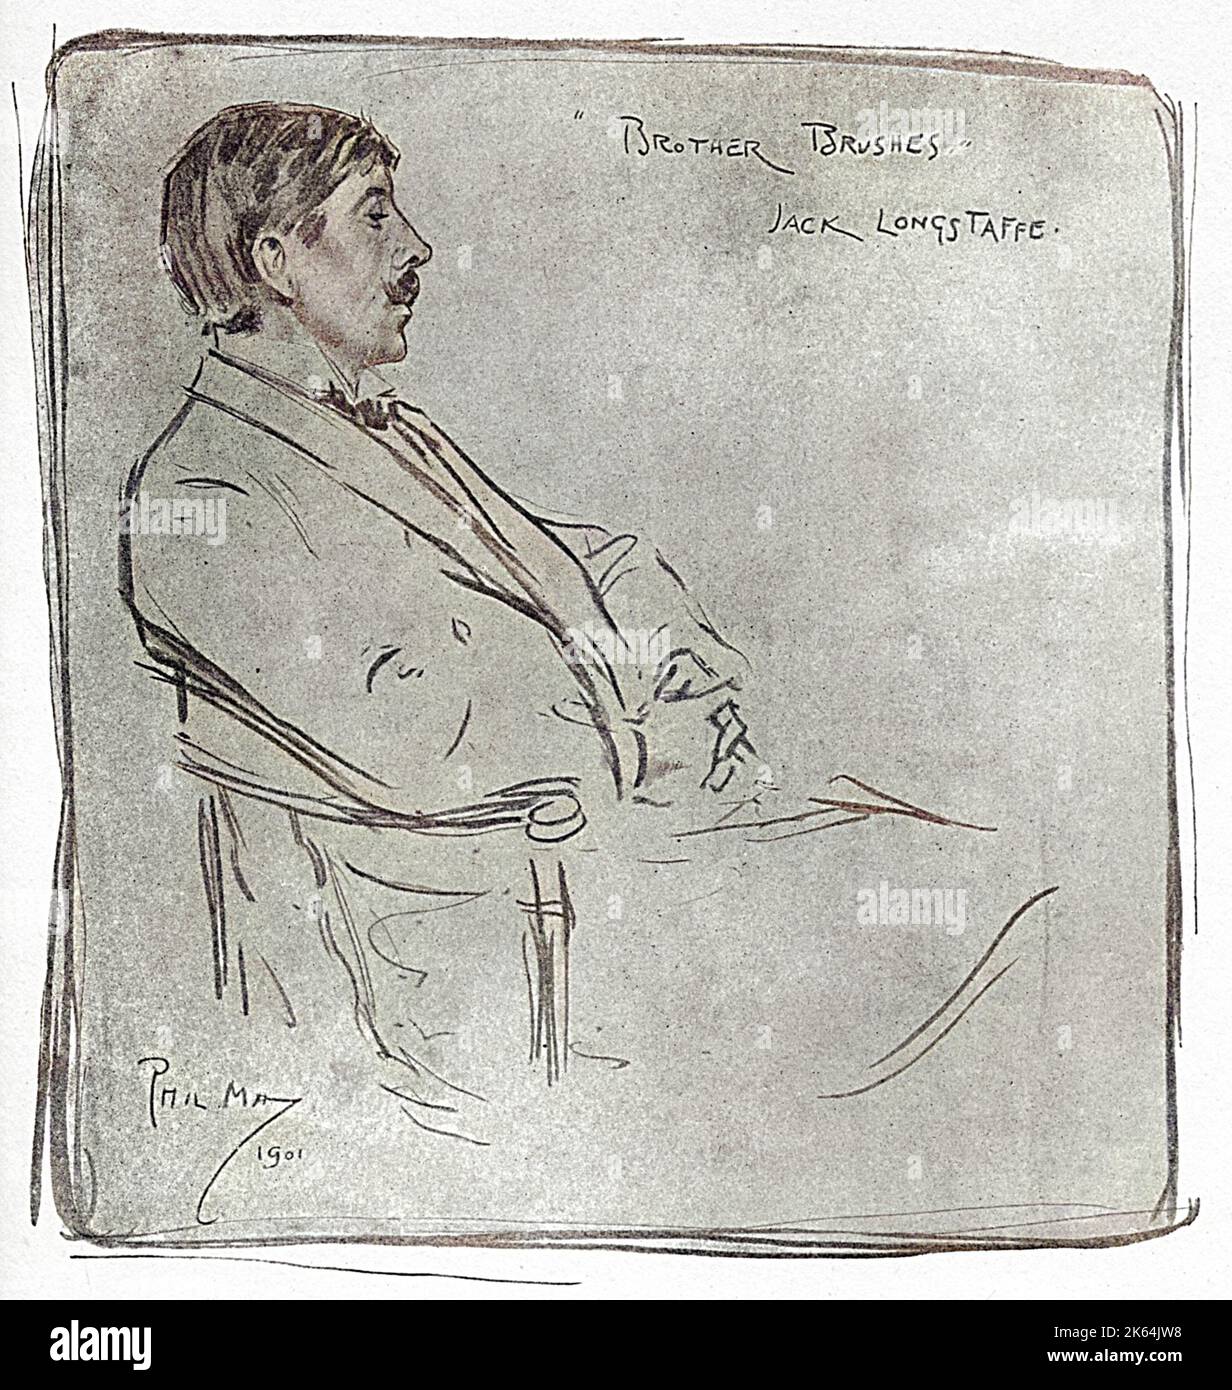 Brother Brushes' - Portrait drawing by Phil May of Sir John Longstaff (1862-1941) - Australian Artist, painter, war artist and a five-time winner of the Archibald Prize.     Date: 1901 Stock Photo